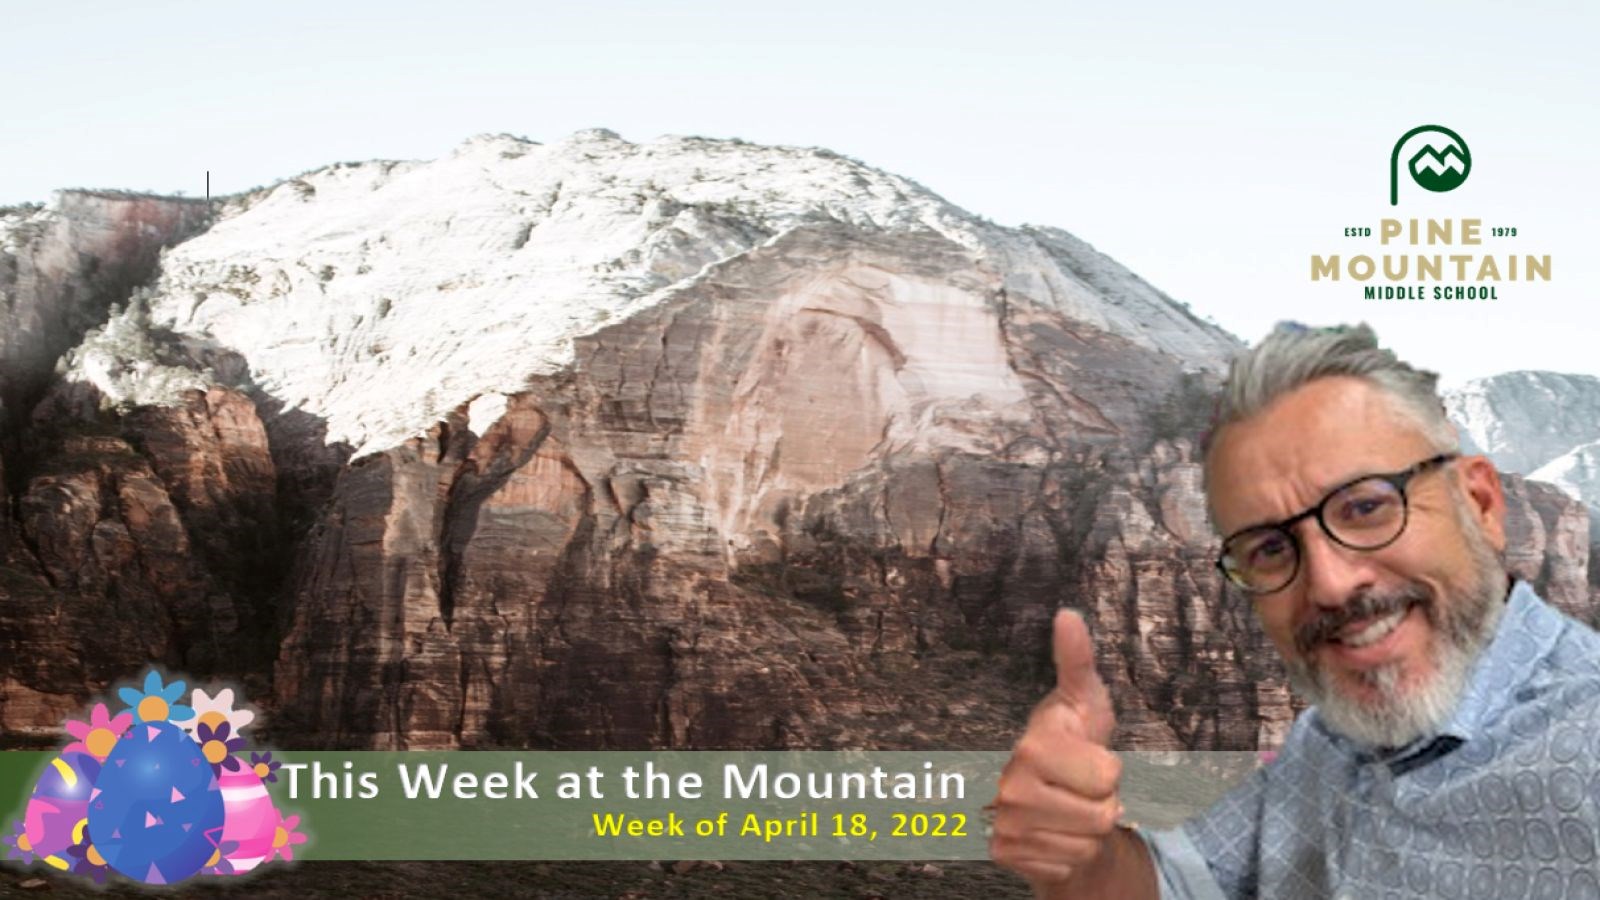 Principal in front of Mountain Images Week of 04-18-2022